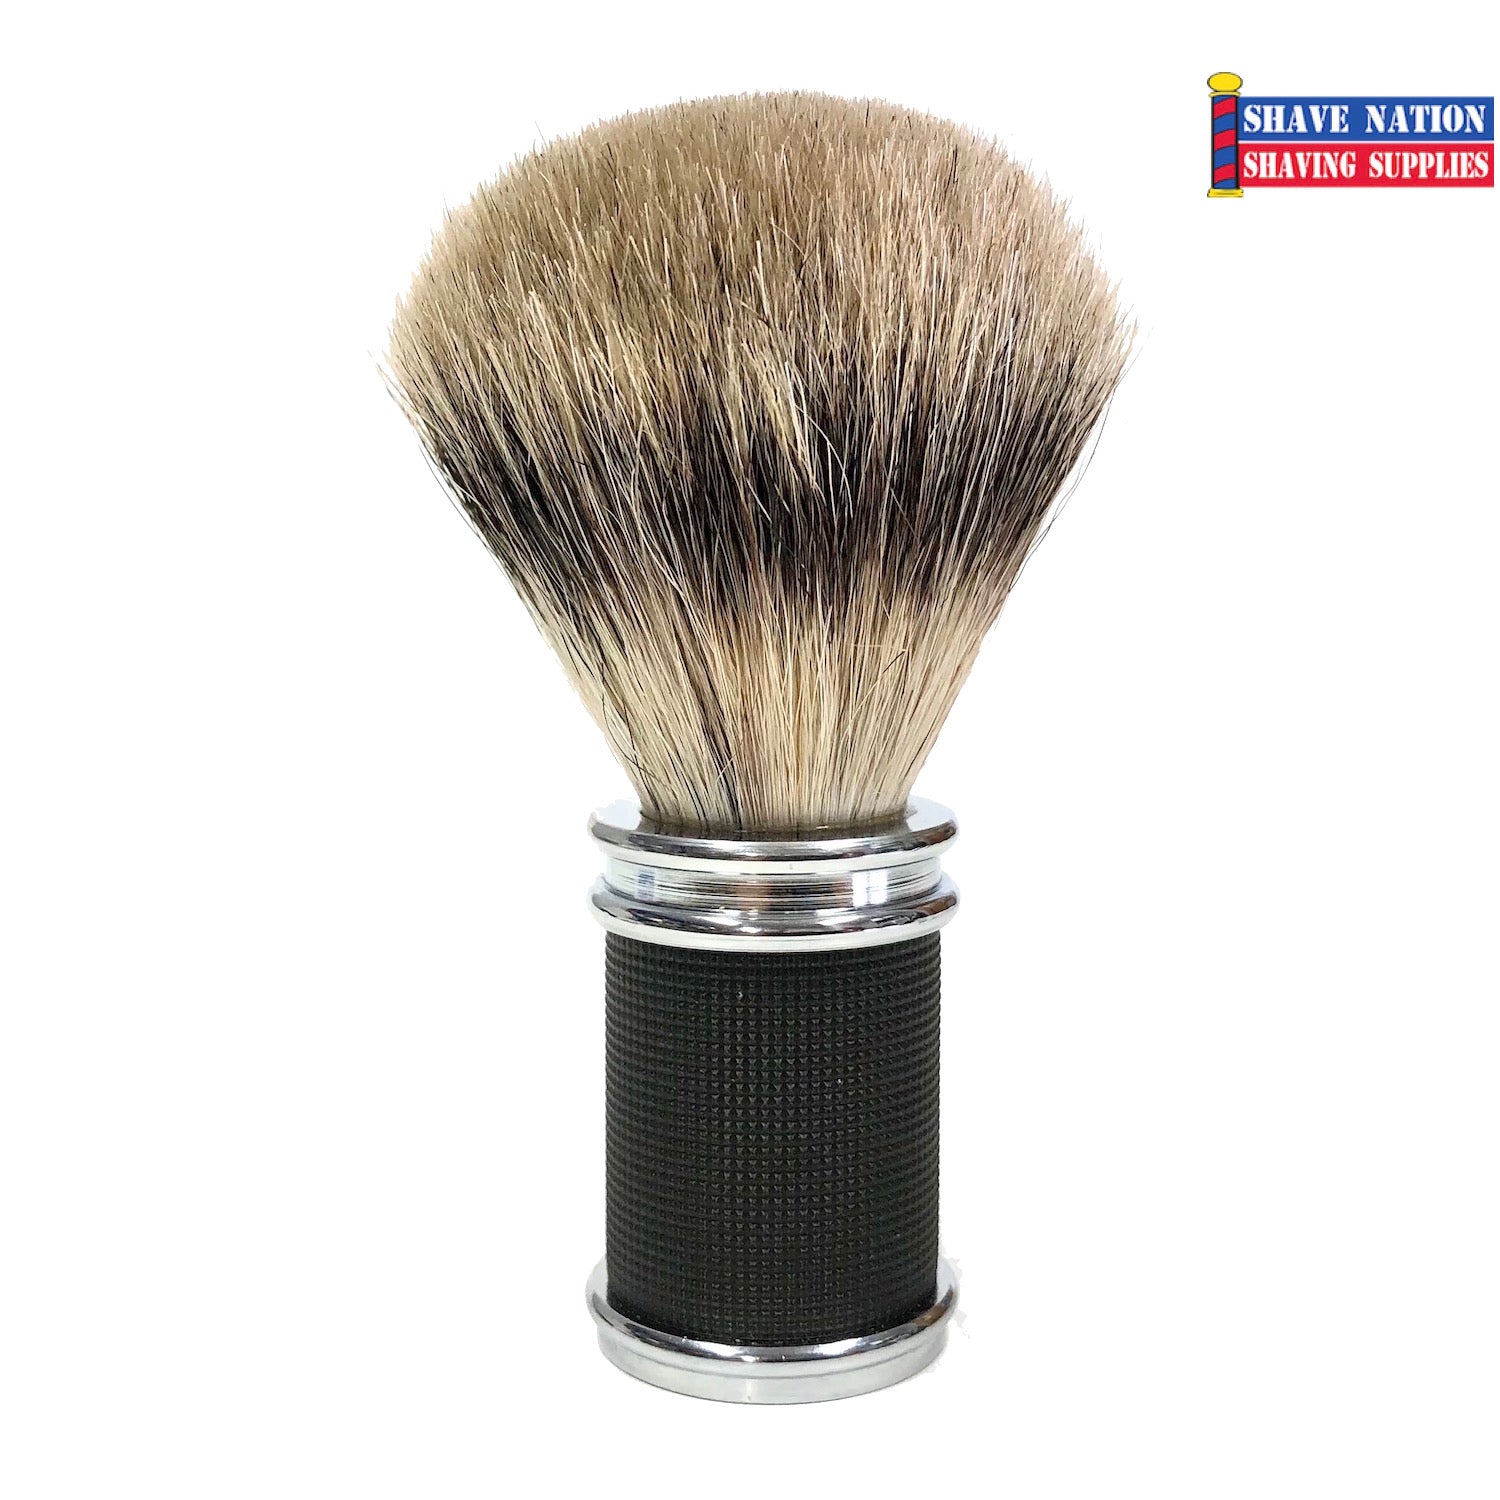 Shave Nation 3D Black and Chrome Handle Pure Badger Brush